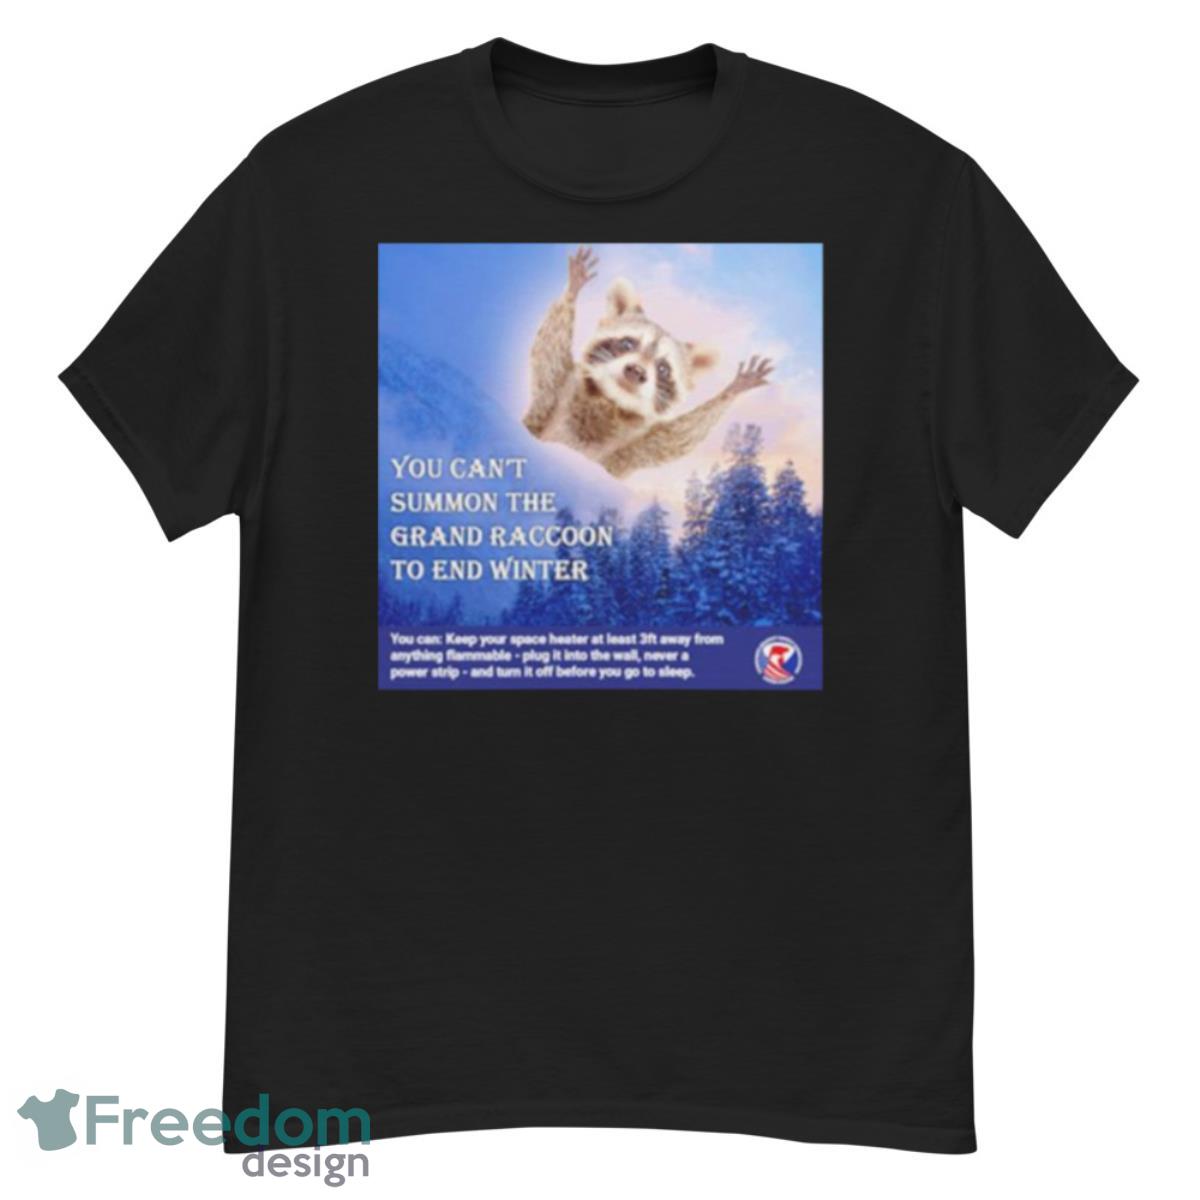 US You Can’t Summon The Grand Raccoon To End Winter Shirt - G500 Men’s Classic T-Shirt